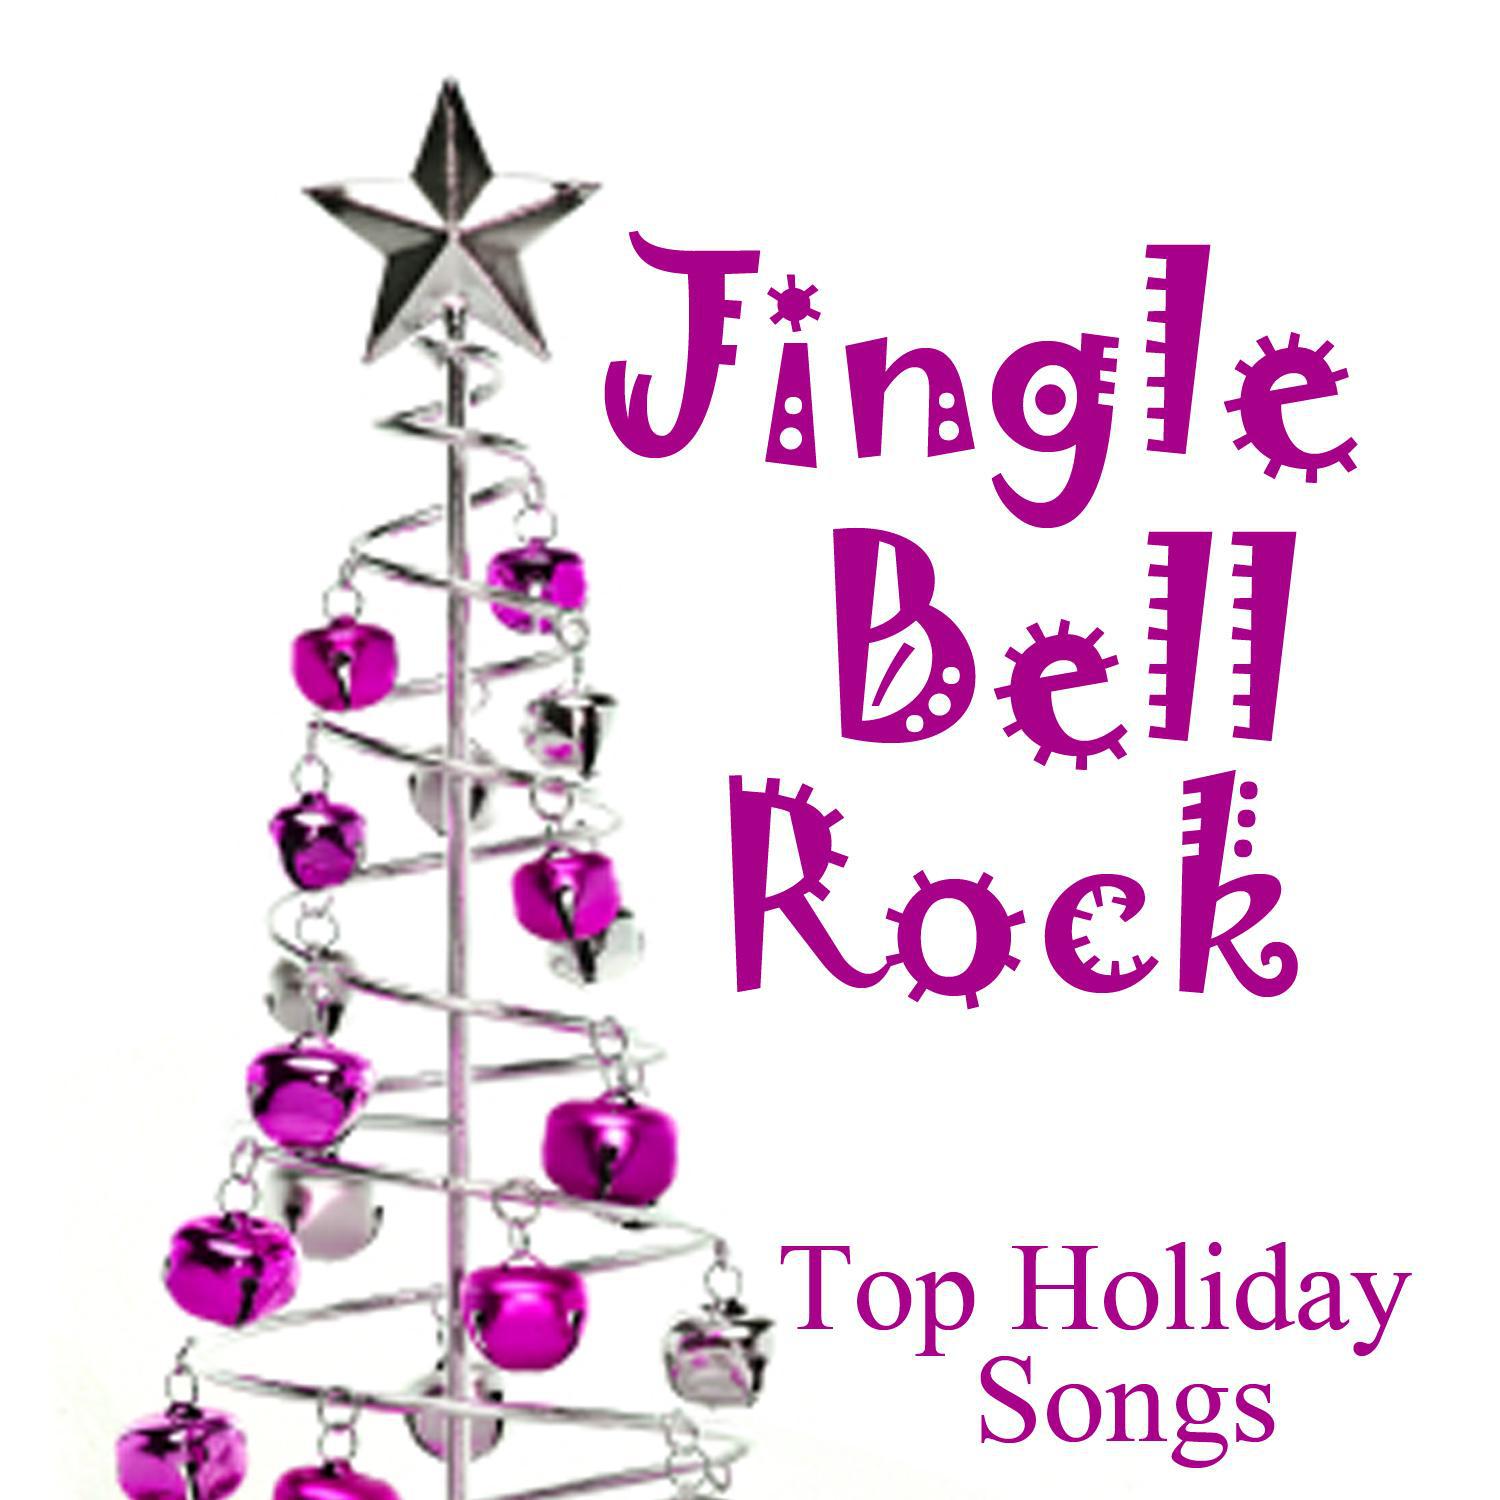 Top Holiday Songs - Jingle Bell Rock，Top Holiday Songs，《Top Holiday Songs -...